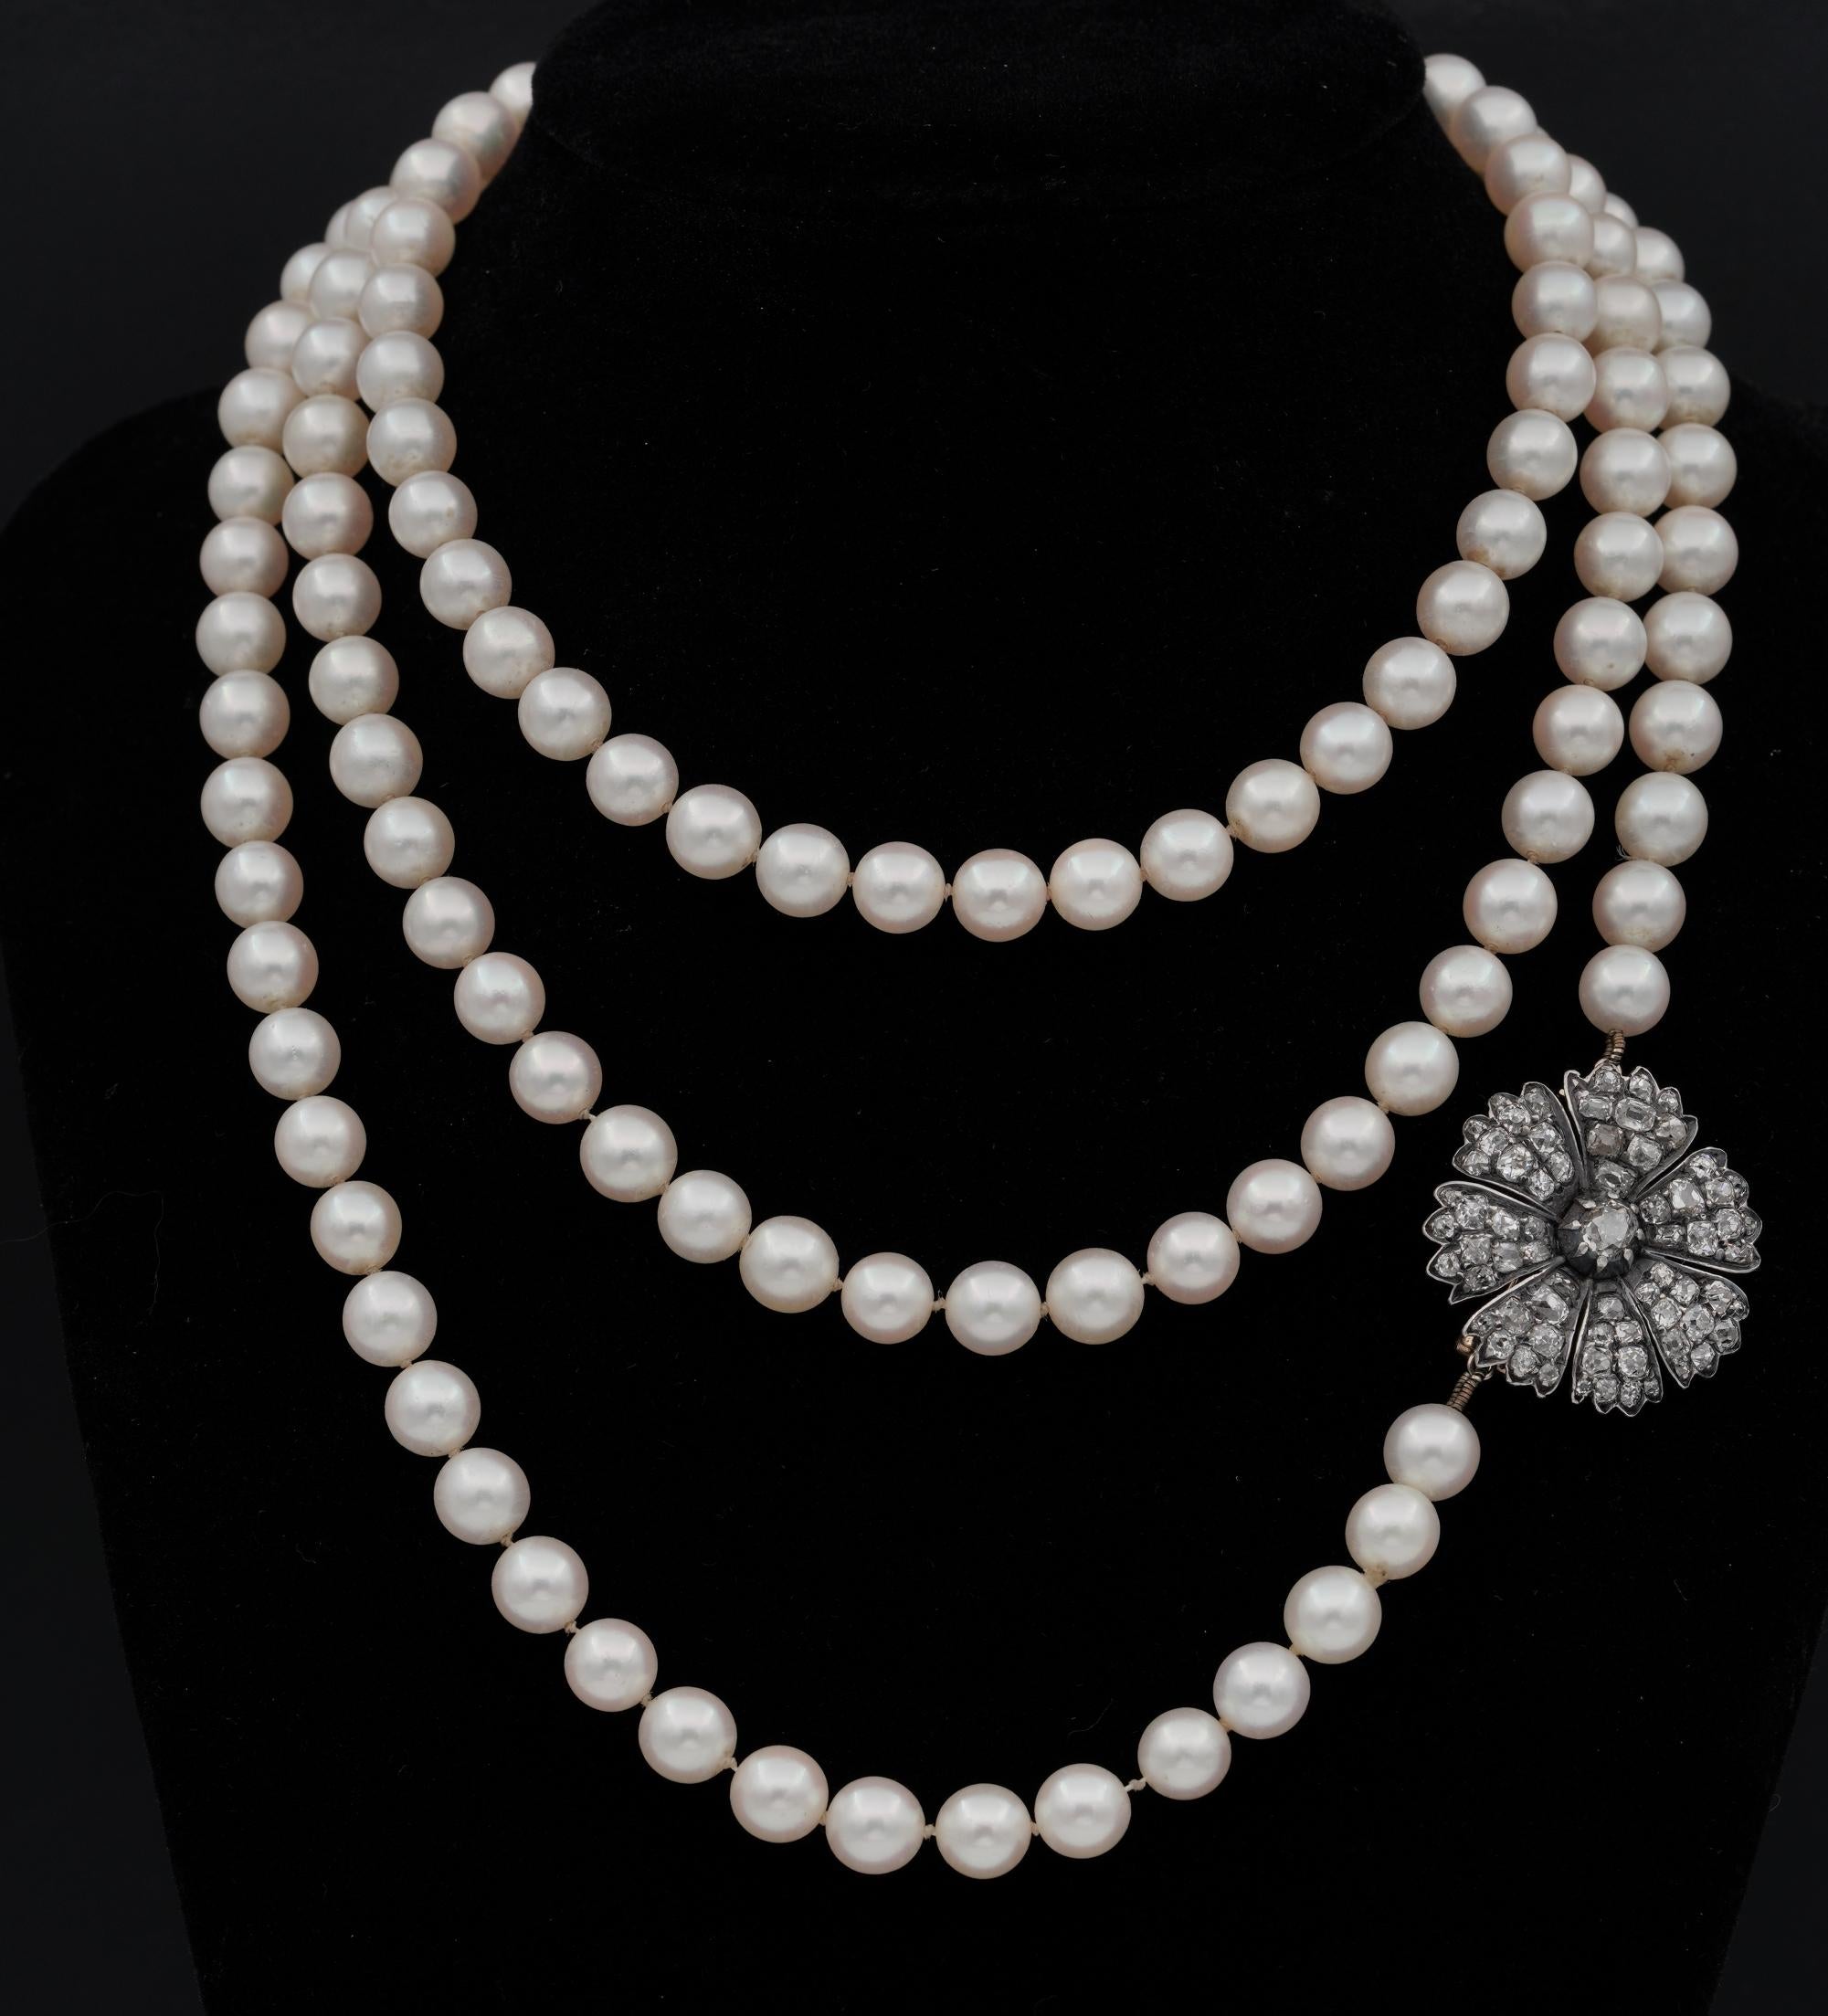 Timeless Appeal

An high desirable Victorian period long sautoir necklace, complemented with an amazing flower clasp with rich set of old mine cut Diamonds
Comprising a long strand of 142 antique 7.mm. well matched cultured salt sea Pearls, prizing